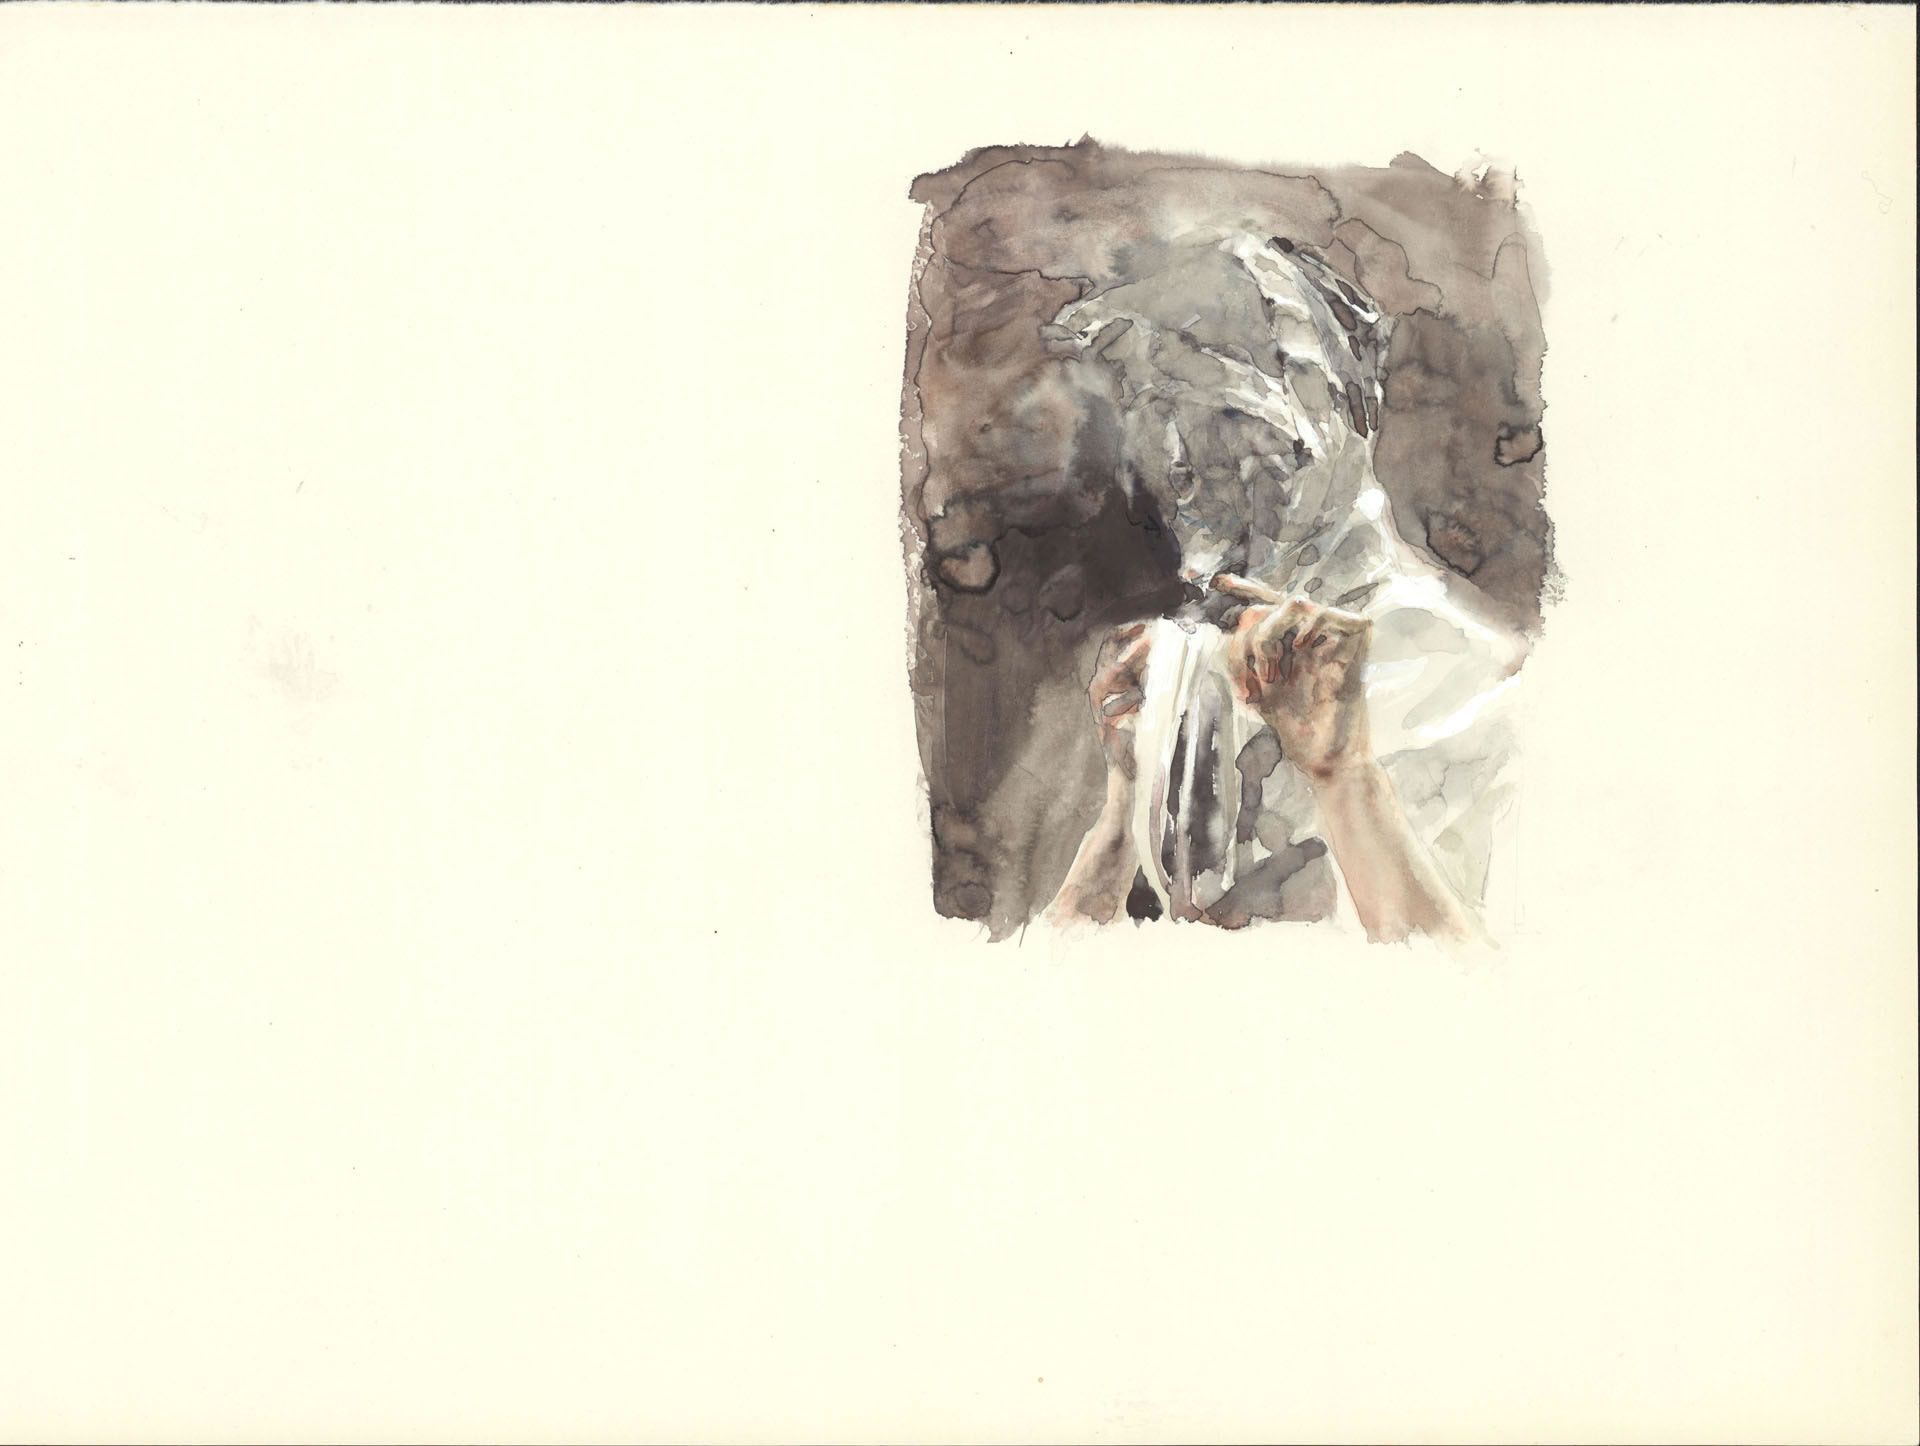 Victoria Vinogradova | How to disappear completely | Aquarell auf Papier | 29 x 35 cm | Foto Johannes Puch